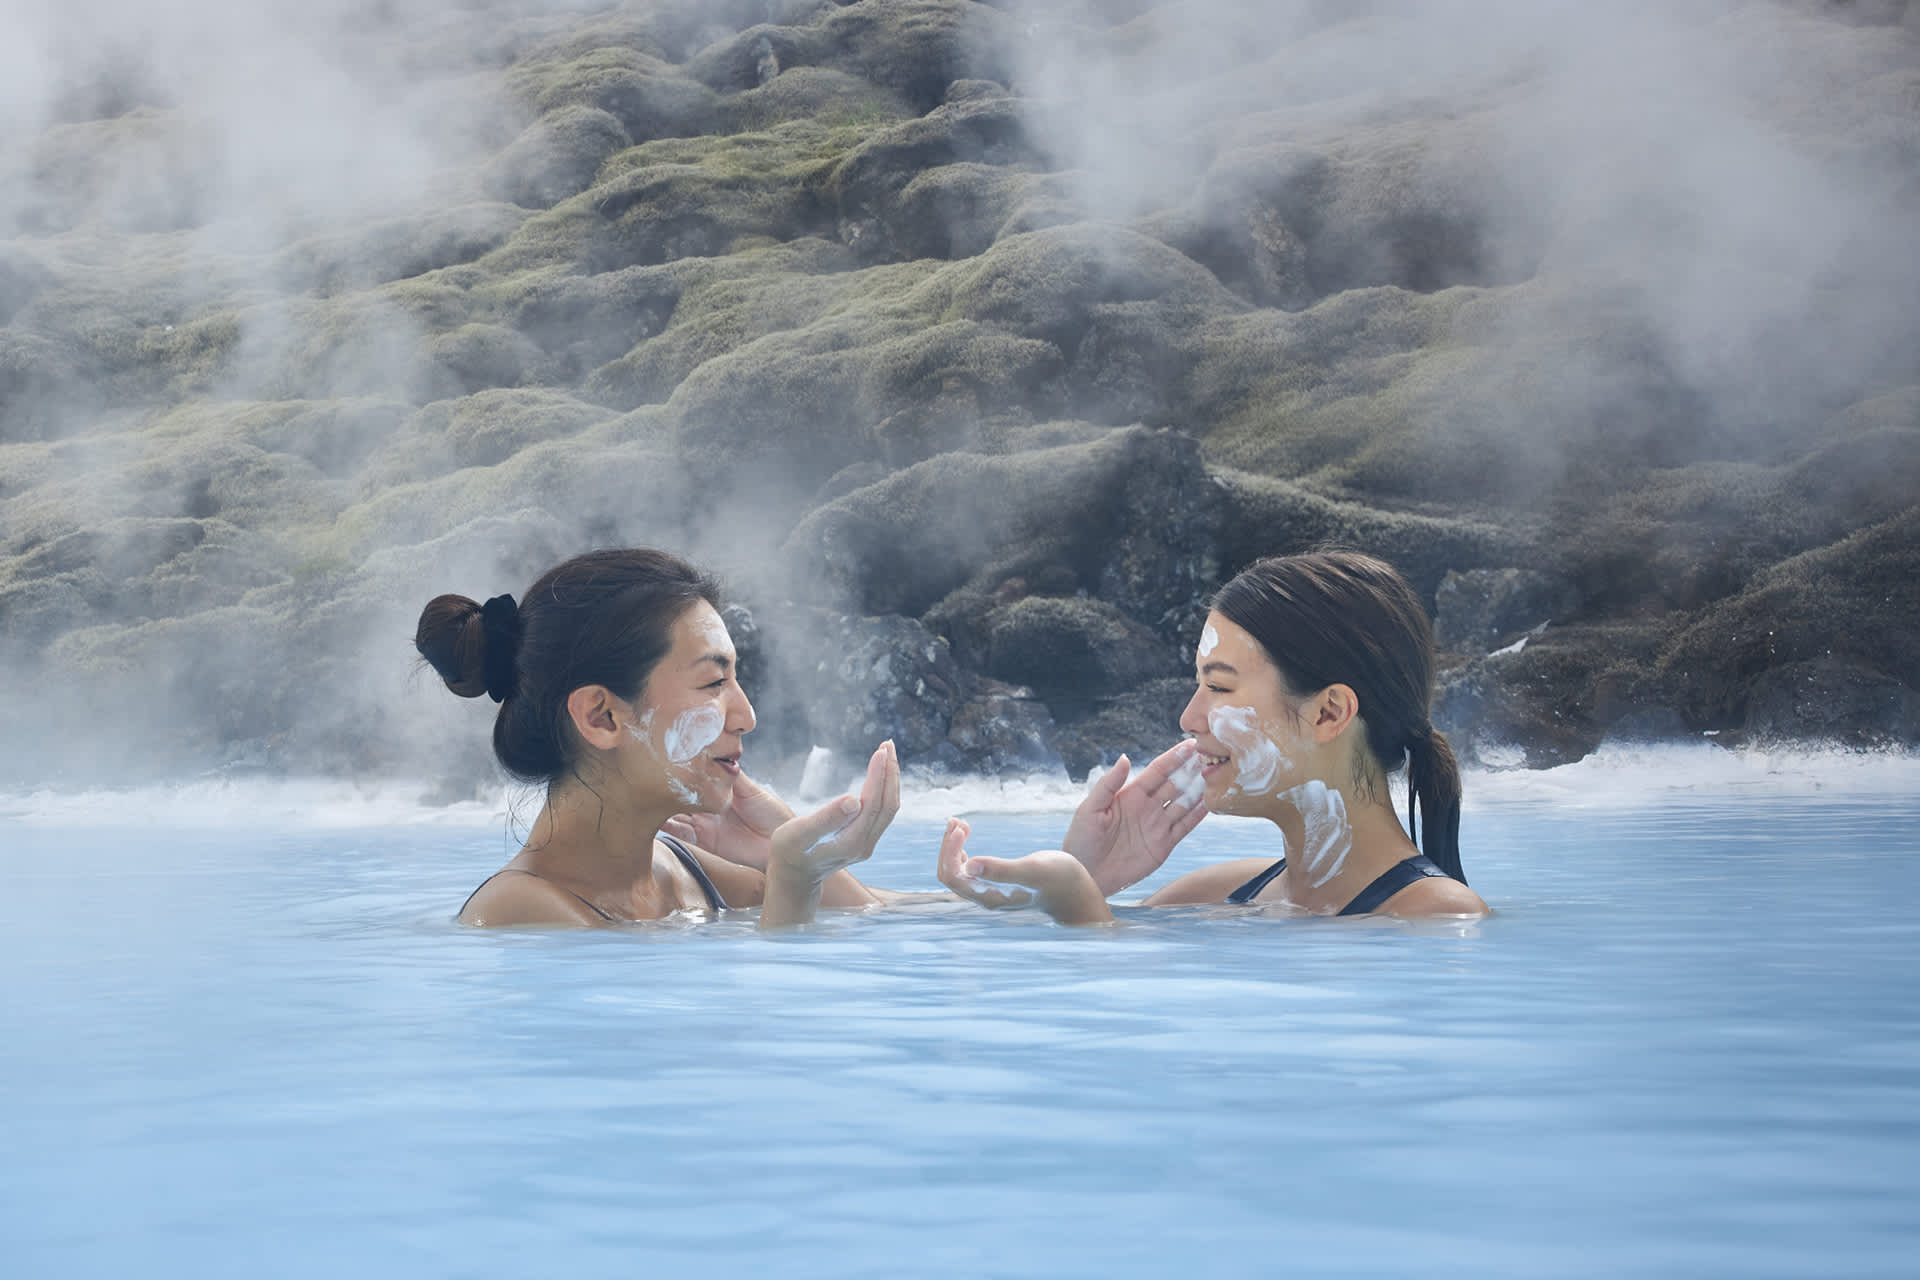 Is Blue Lagoon In Iceland Worth It?